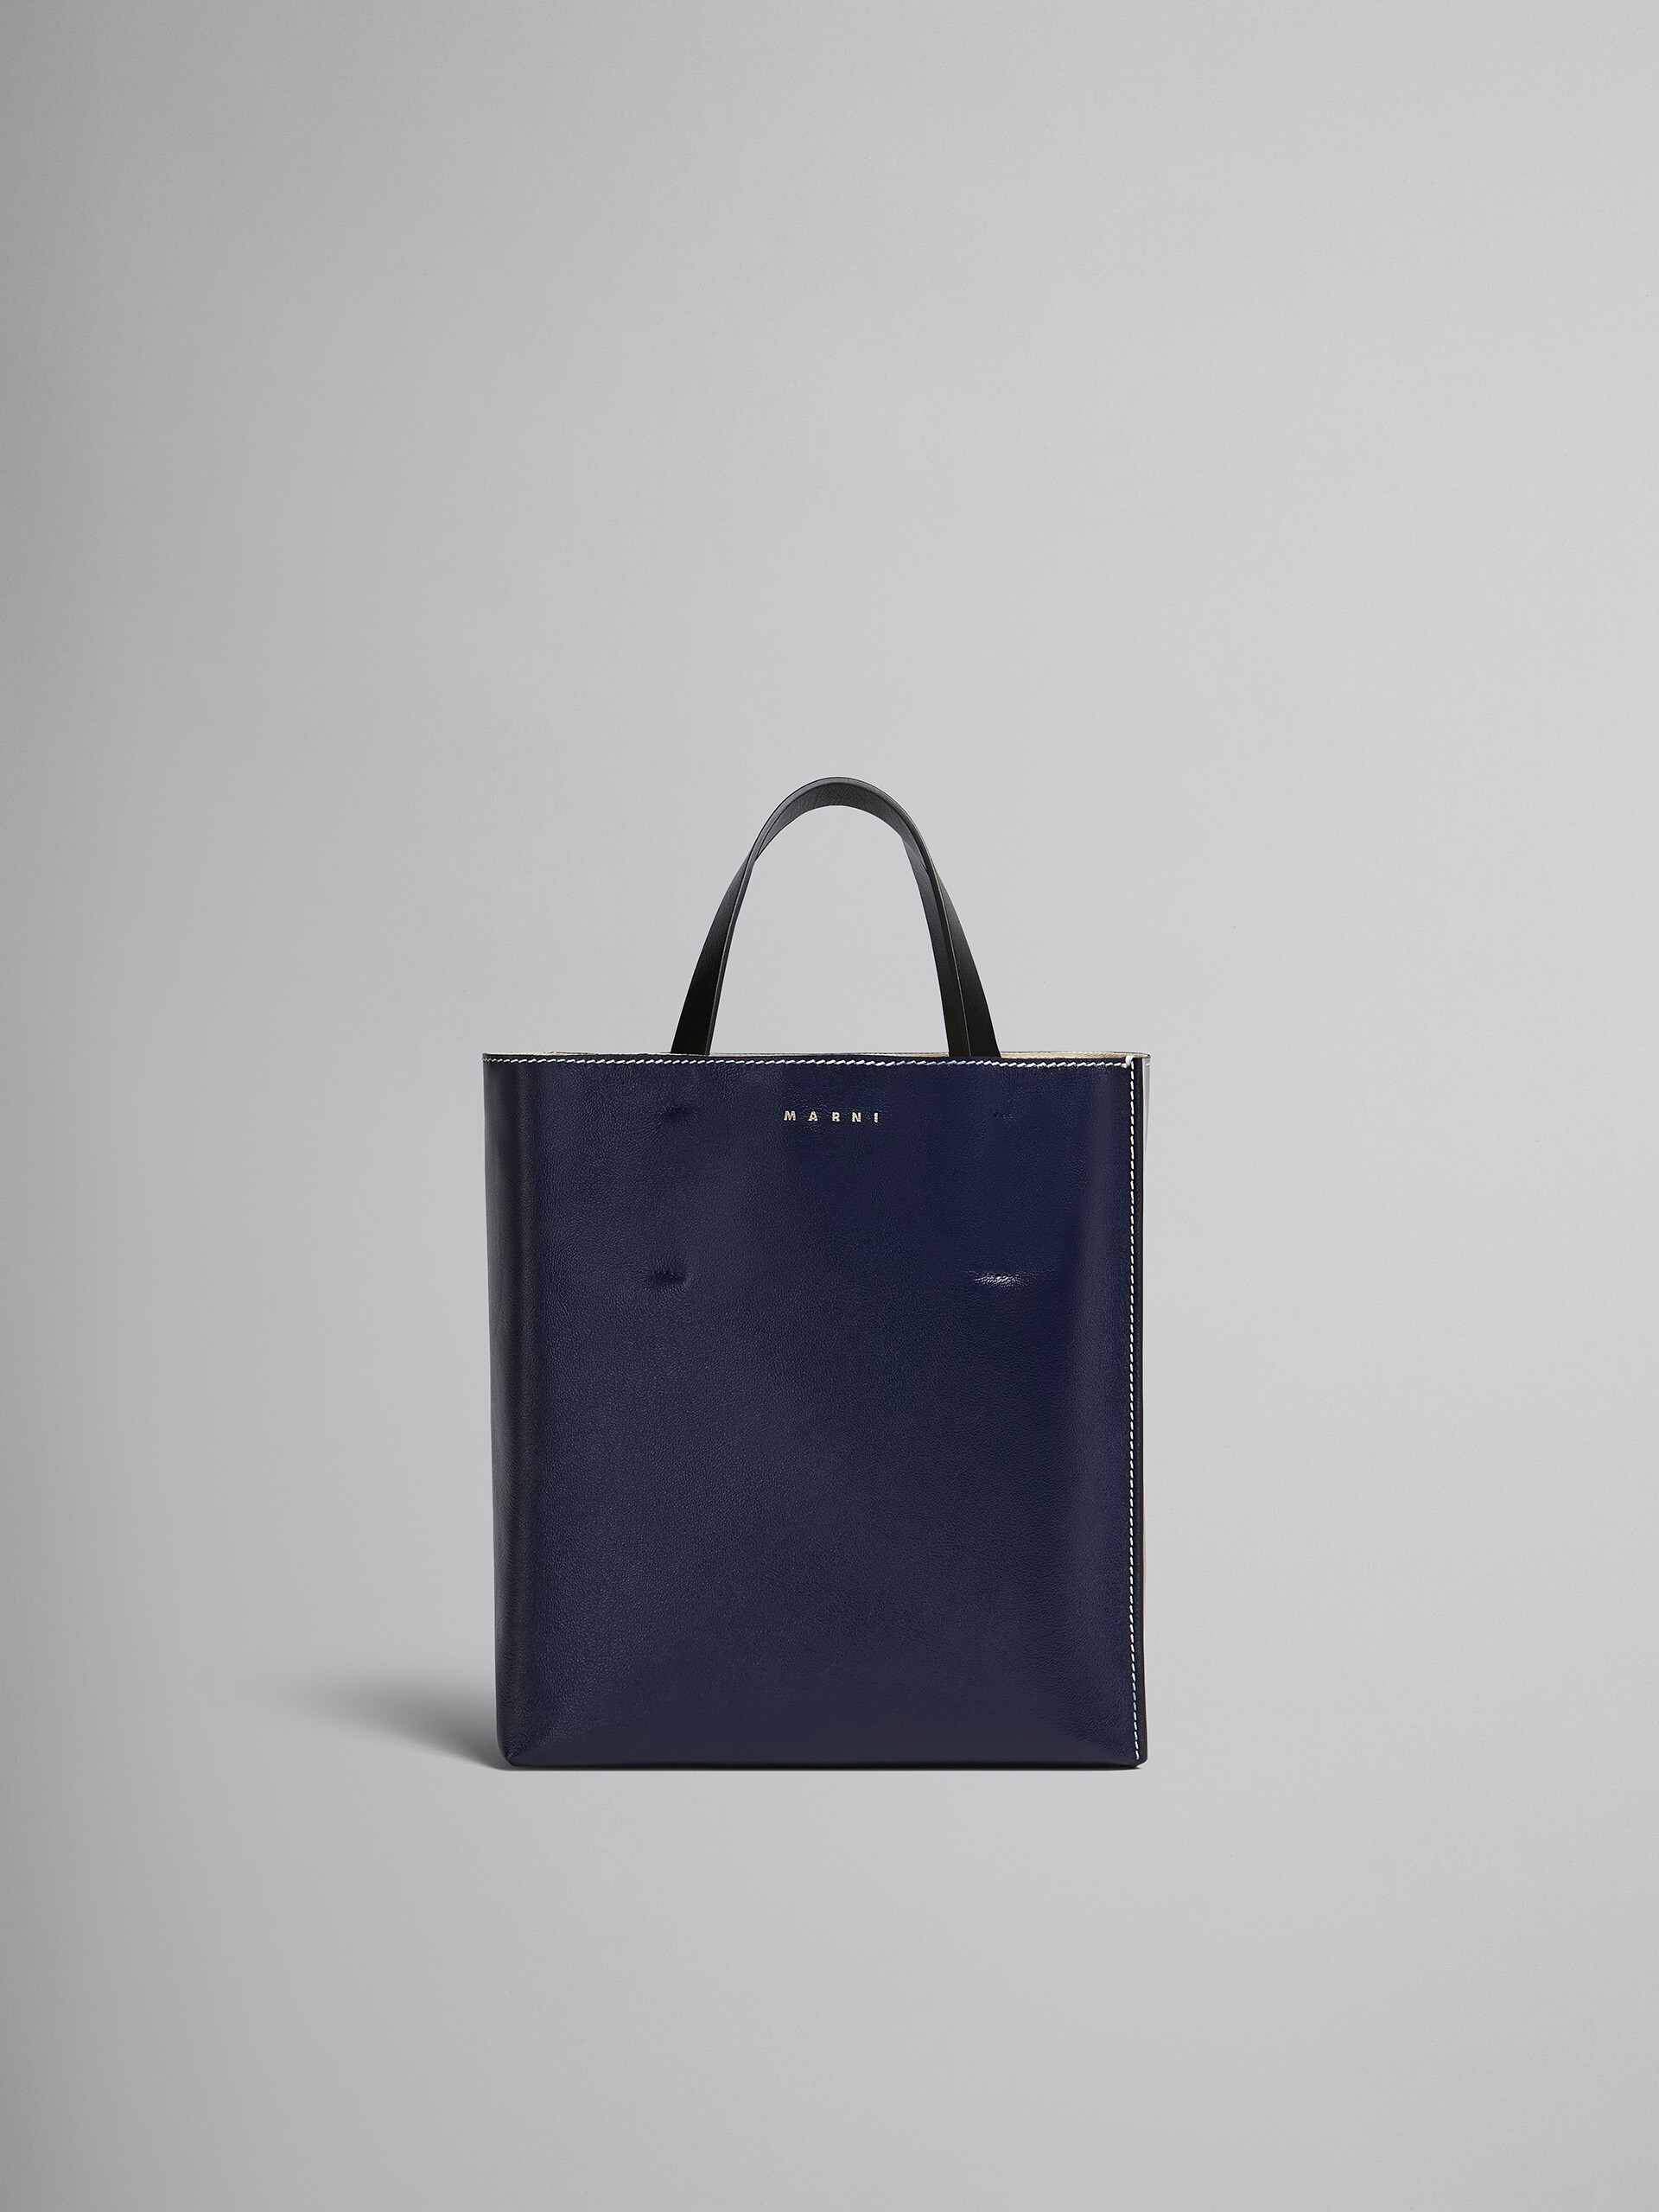 MUSEO SOFT small bag in blue and grey leather - Shopping Bags - Image 1